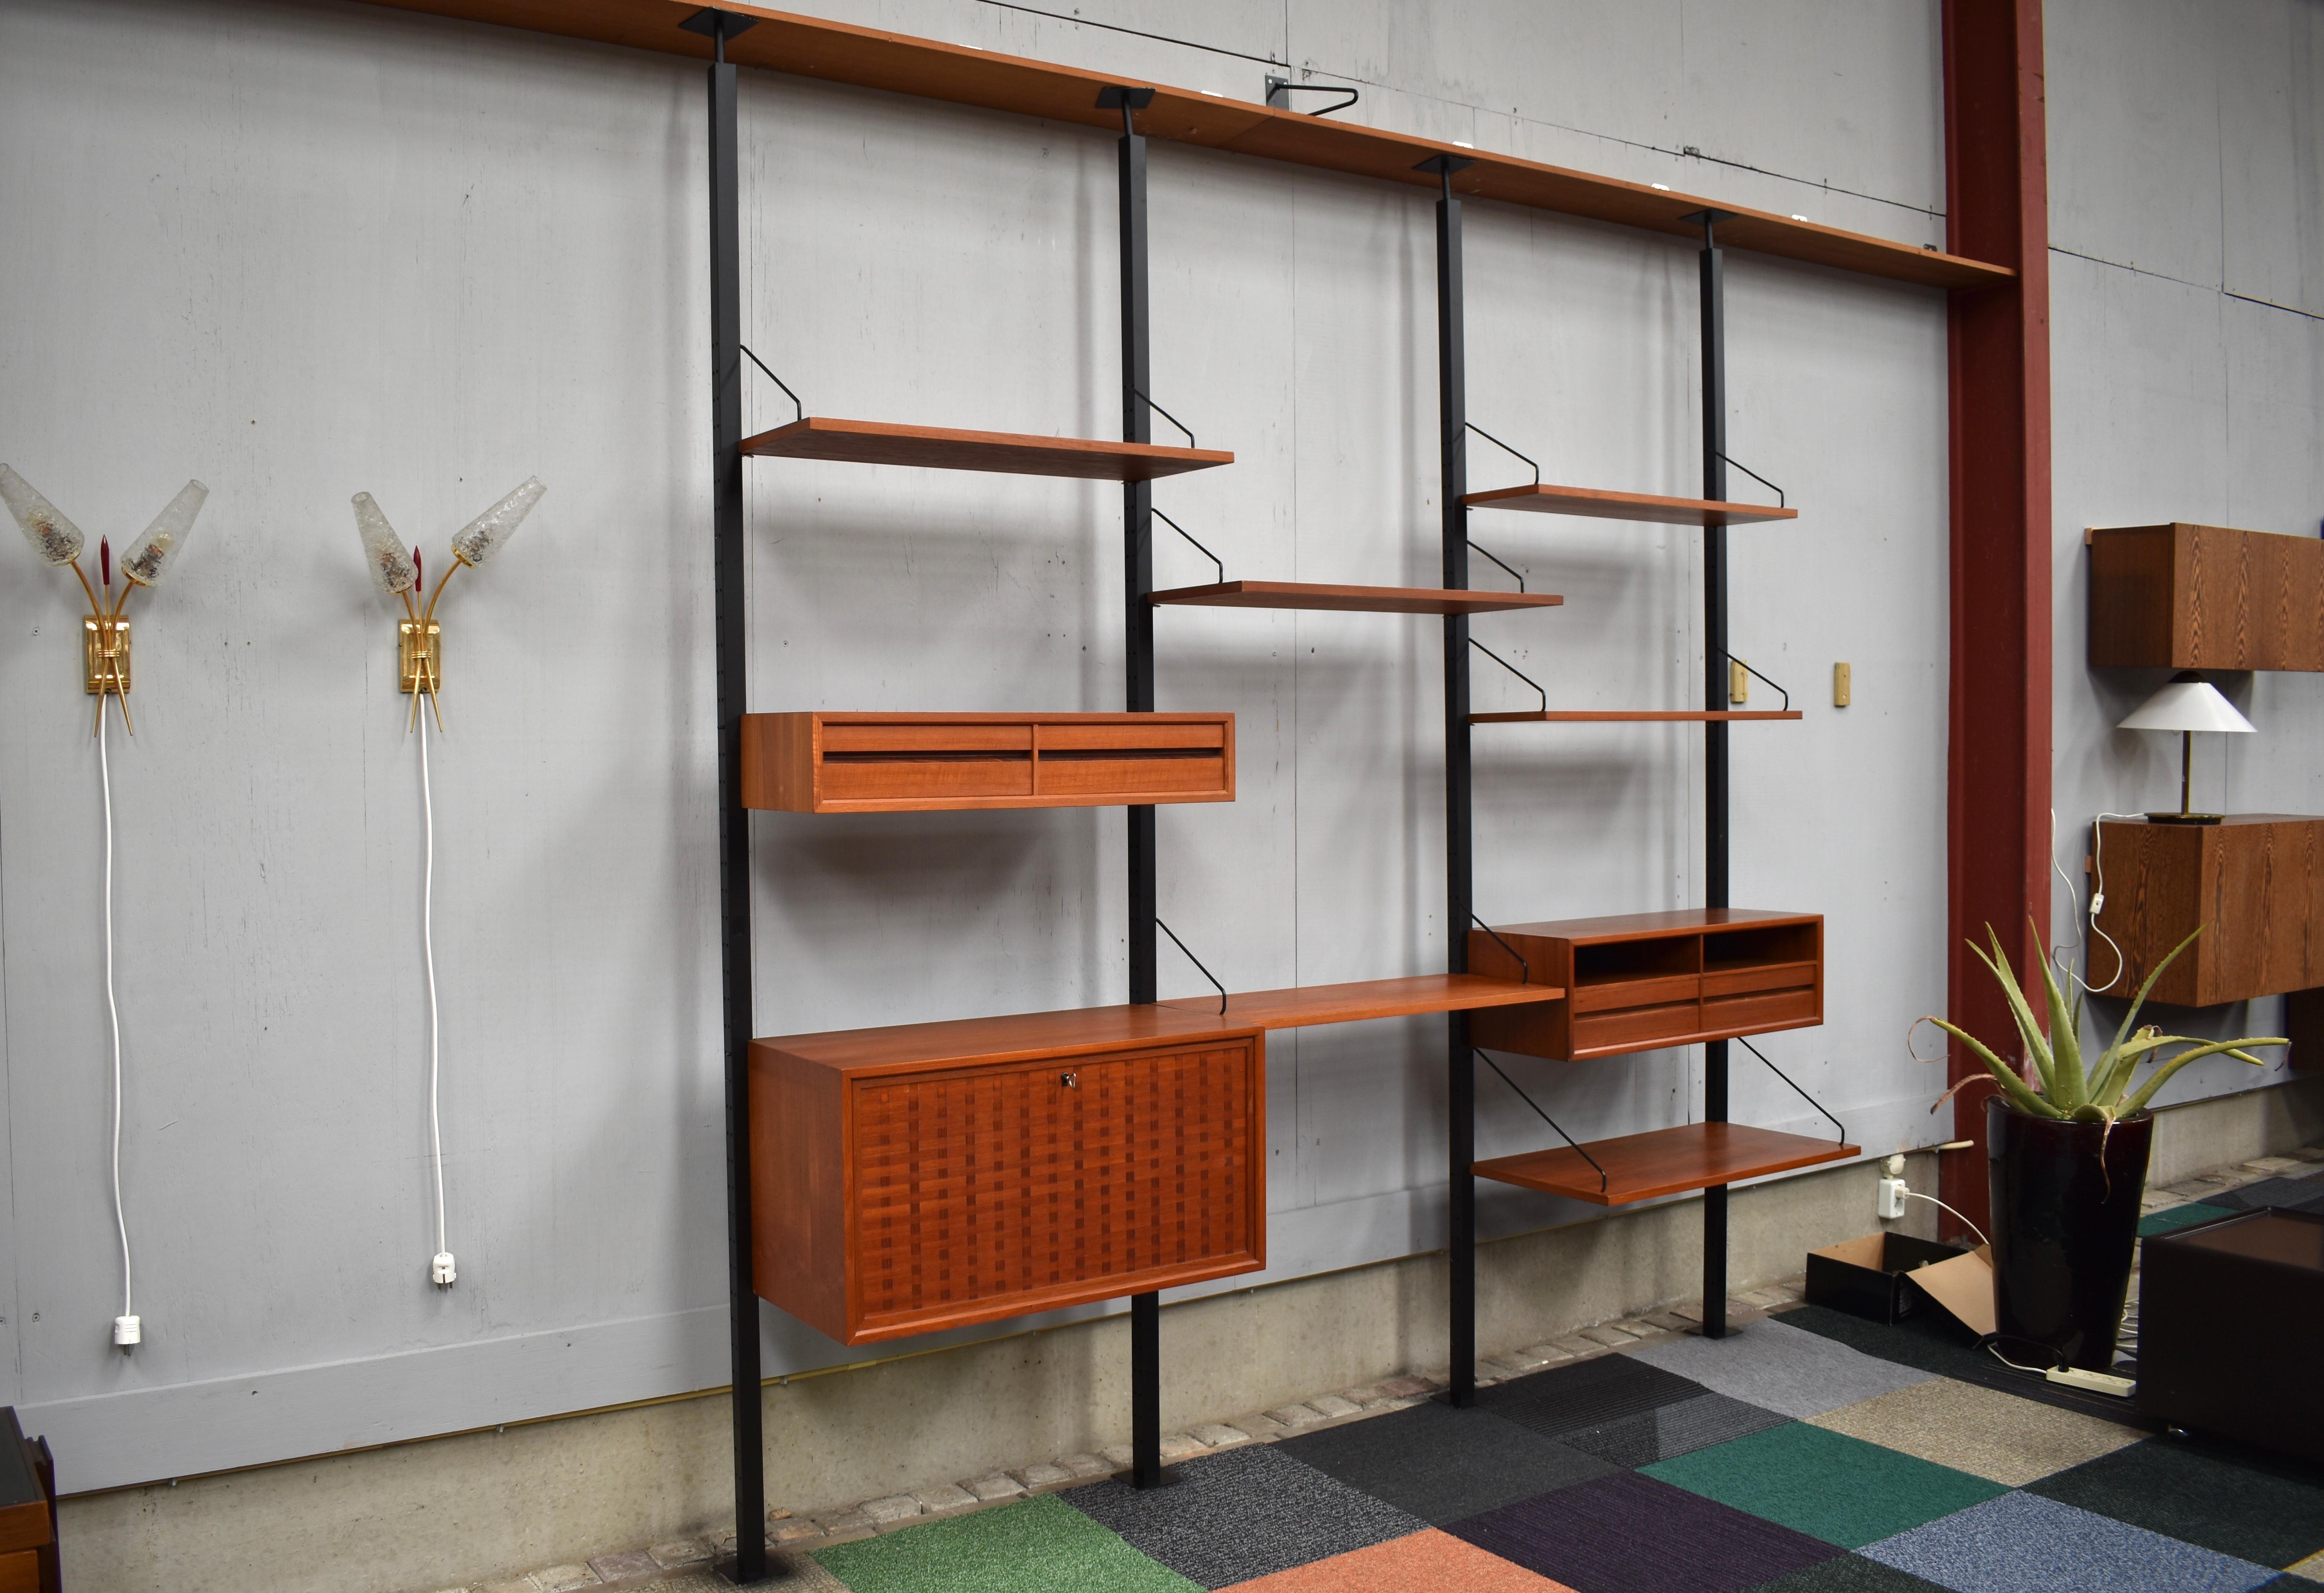 Very rare modular Royal series wall unit in teak by Poul Cadovius, Denmark, 1960s.

This unit has four of the rare free standing mounting pillars that can be used as a room-divider. The pillars are clamped between floors and ceiling, in the top is